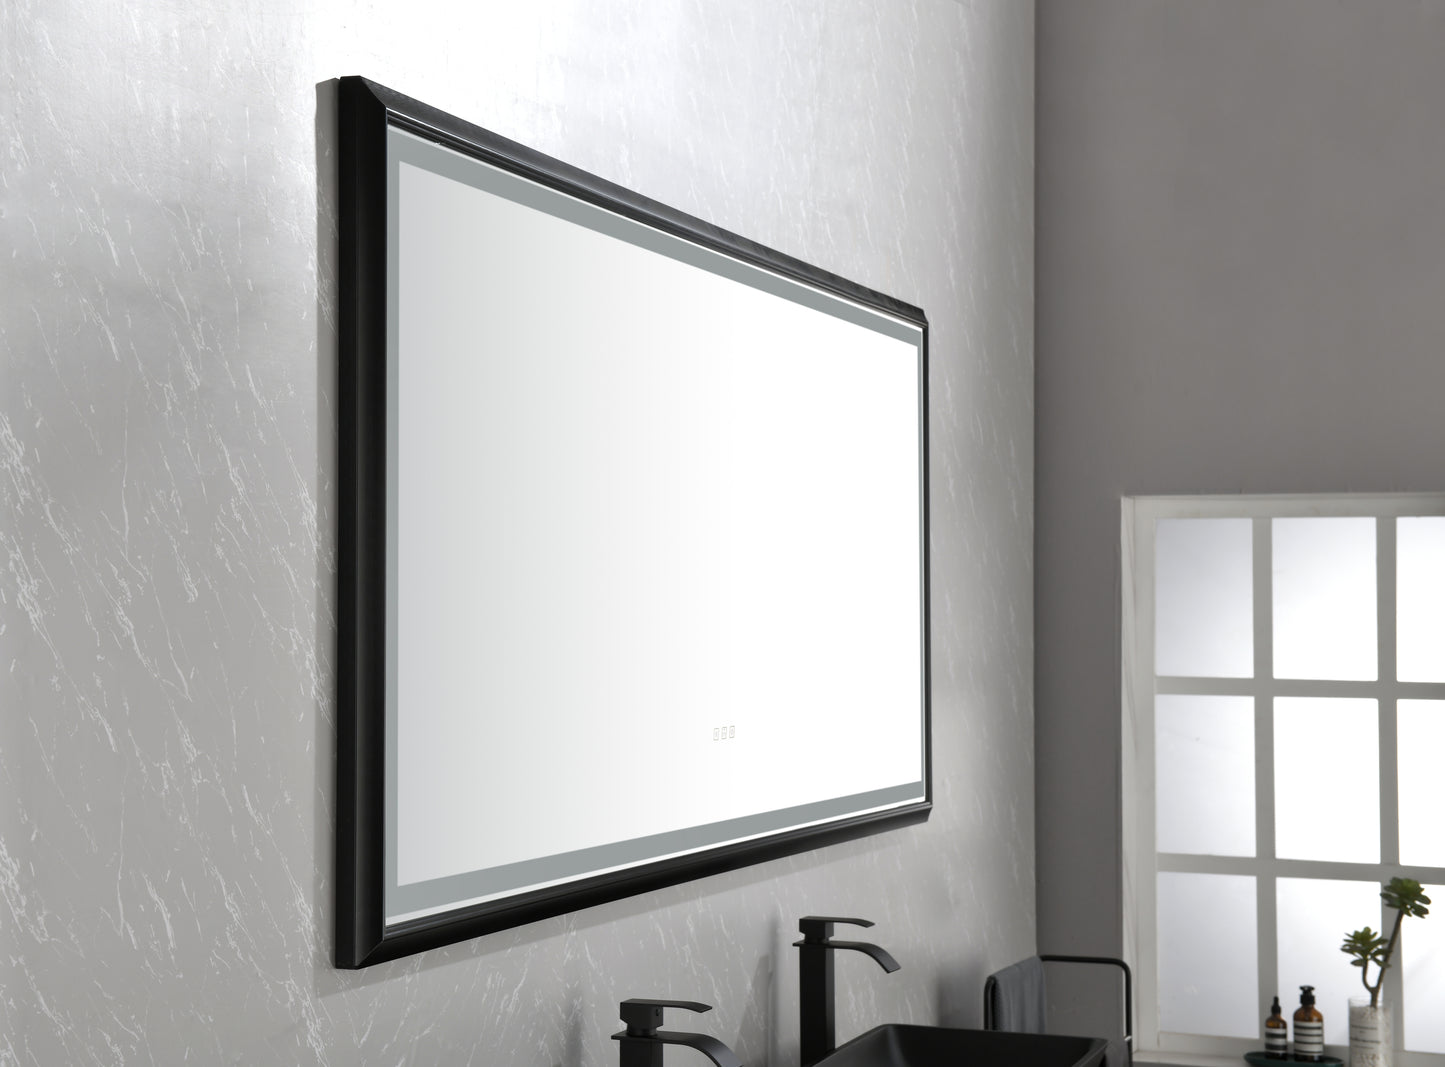 LTL needs to consult the warehouse address88*38 Black Framed Metal FrameBathroom Mirror Square Wall-Mounted Material Framed Explosion-Proof \\nVanity Mirror Shaving Mirror Magnifying Mirror